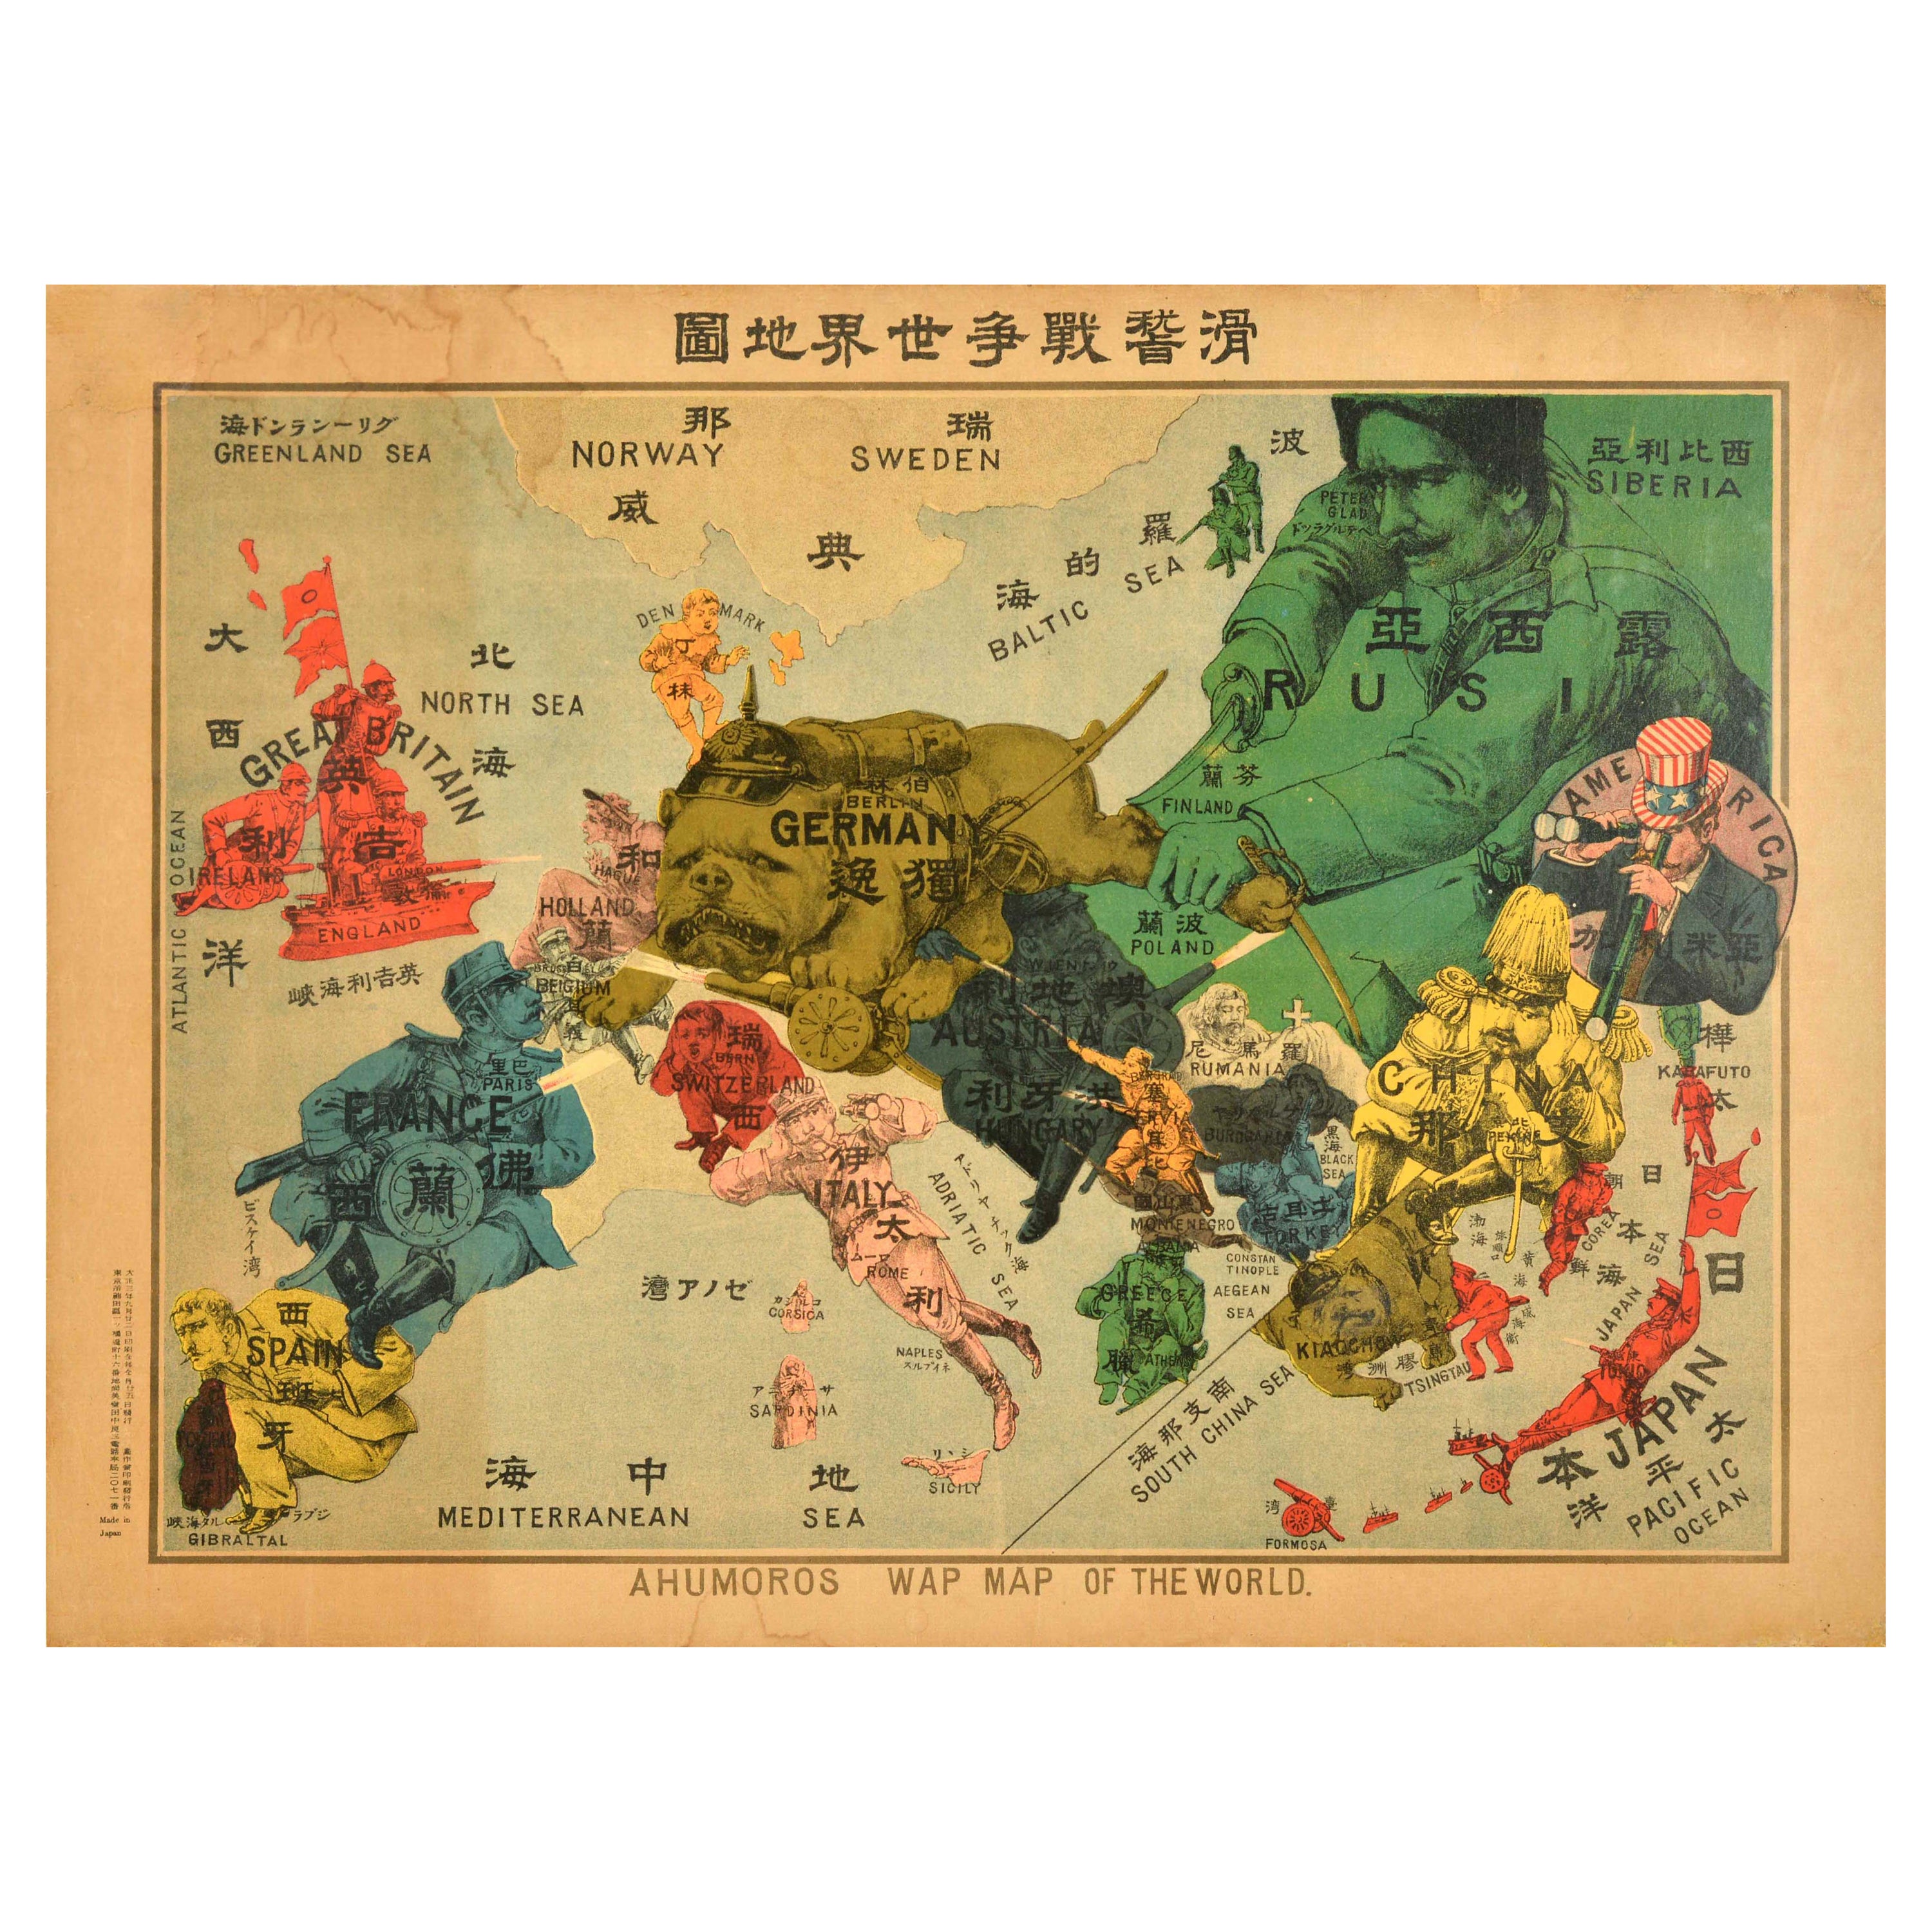 Original Antique World War One Humoros Wap Map Of The World WWI Japan Caricature For Sale